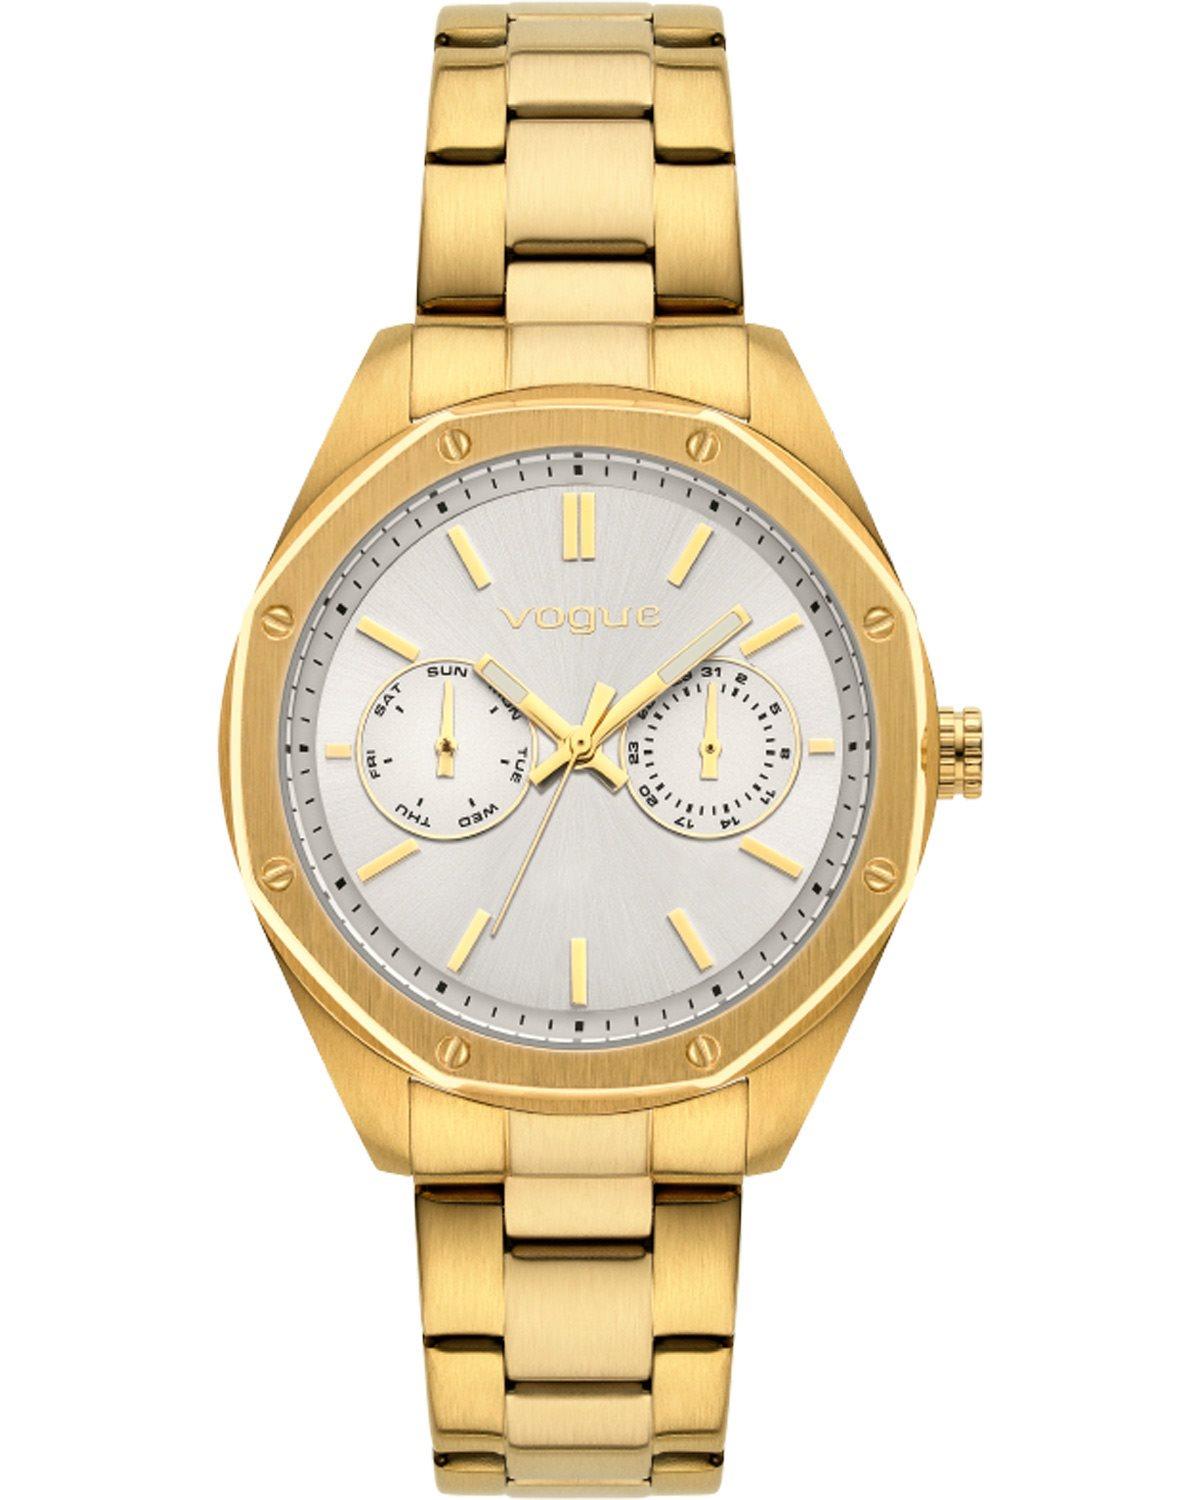 vogue portofino 611541 gold case with stainless steel bracelet image1